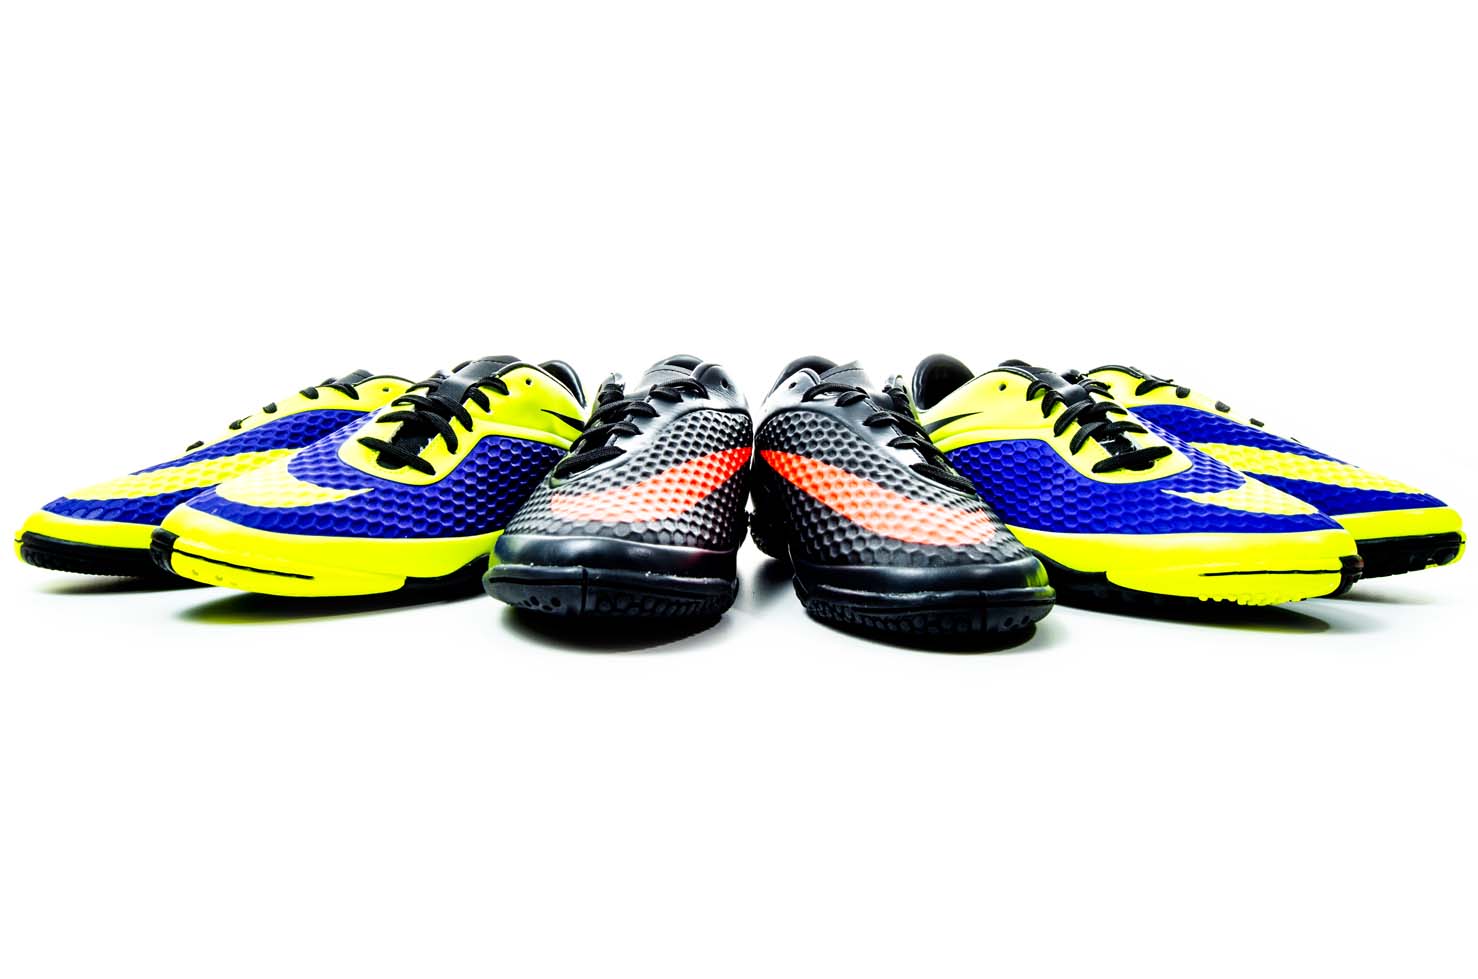 Indoor Soccer Shoes - The Instep
